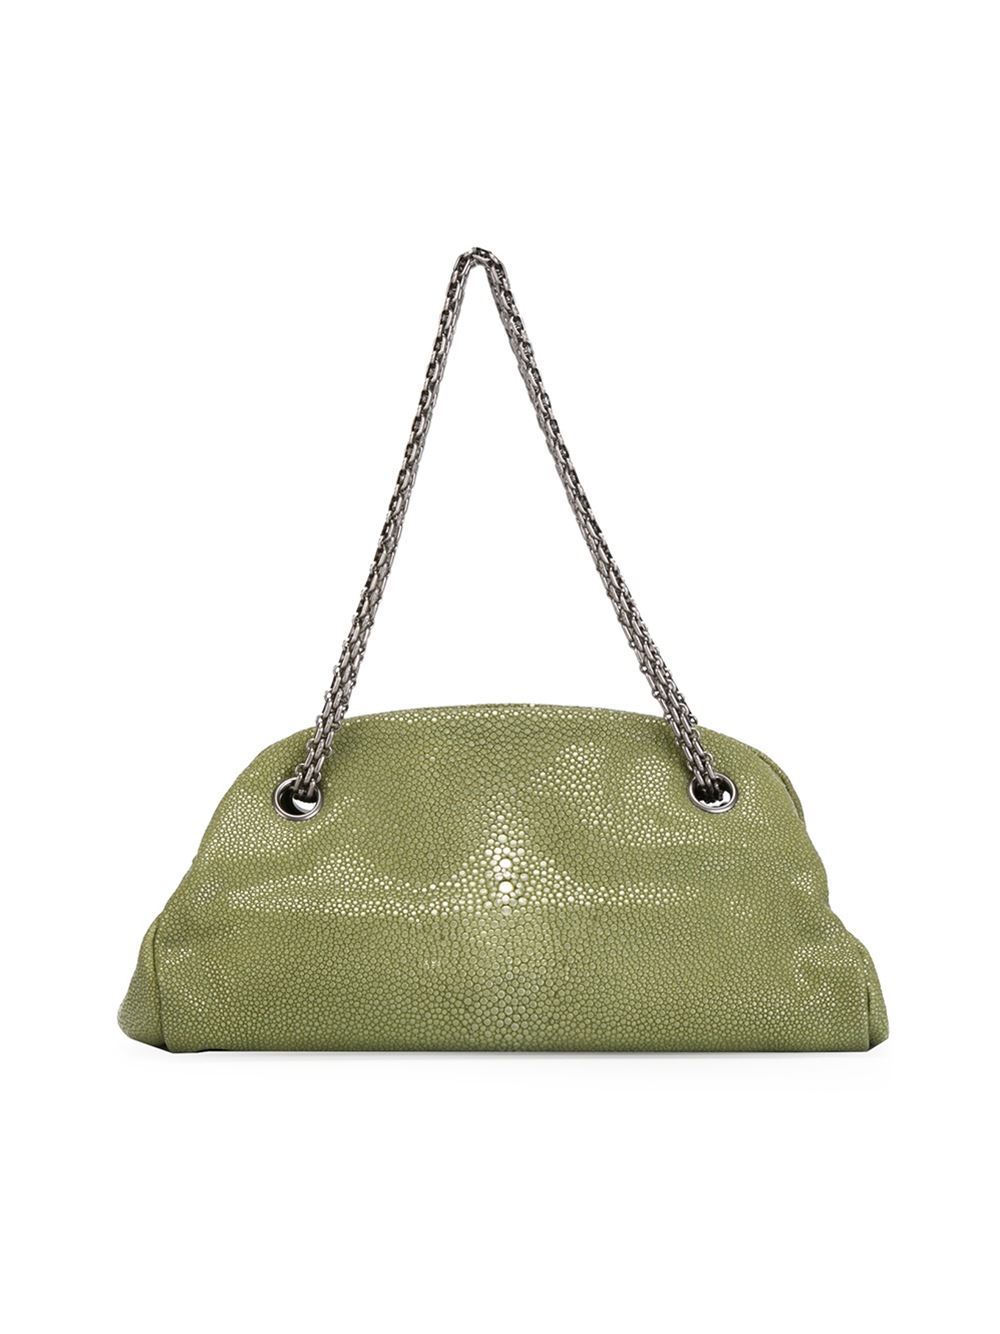 Green stingray half moon tote from Chanel features an open top design, a chain shoulder strap, a logo charm, an internal zipped pocket, an internal logo stamp and multiple interior compartments. Please note that vintage items are not new and